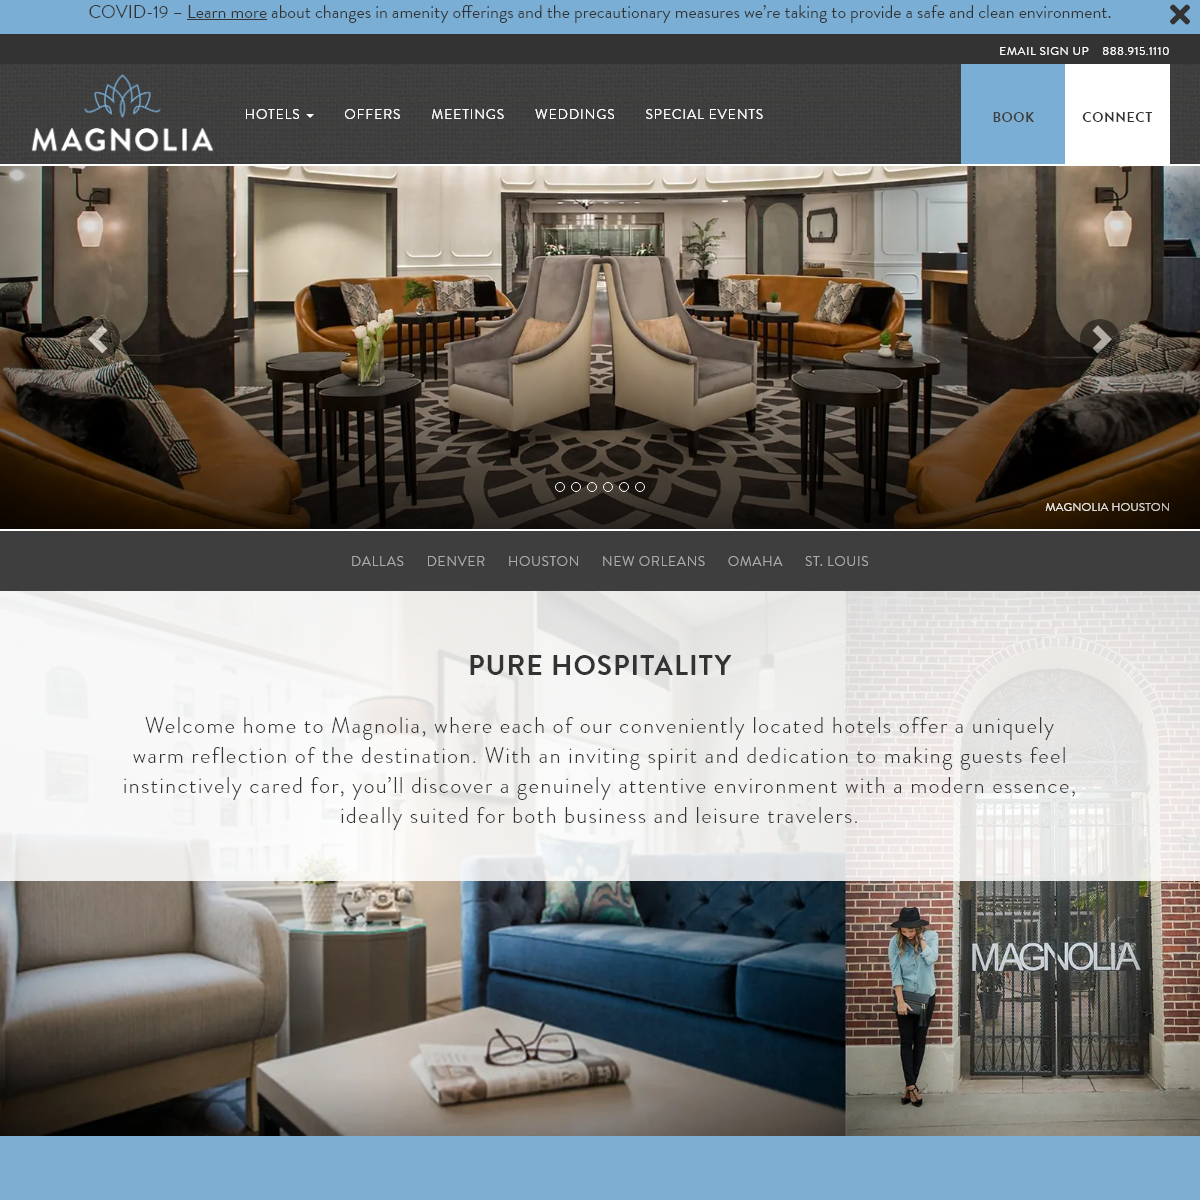 A complete backup of magnoliahotels.com